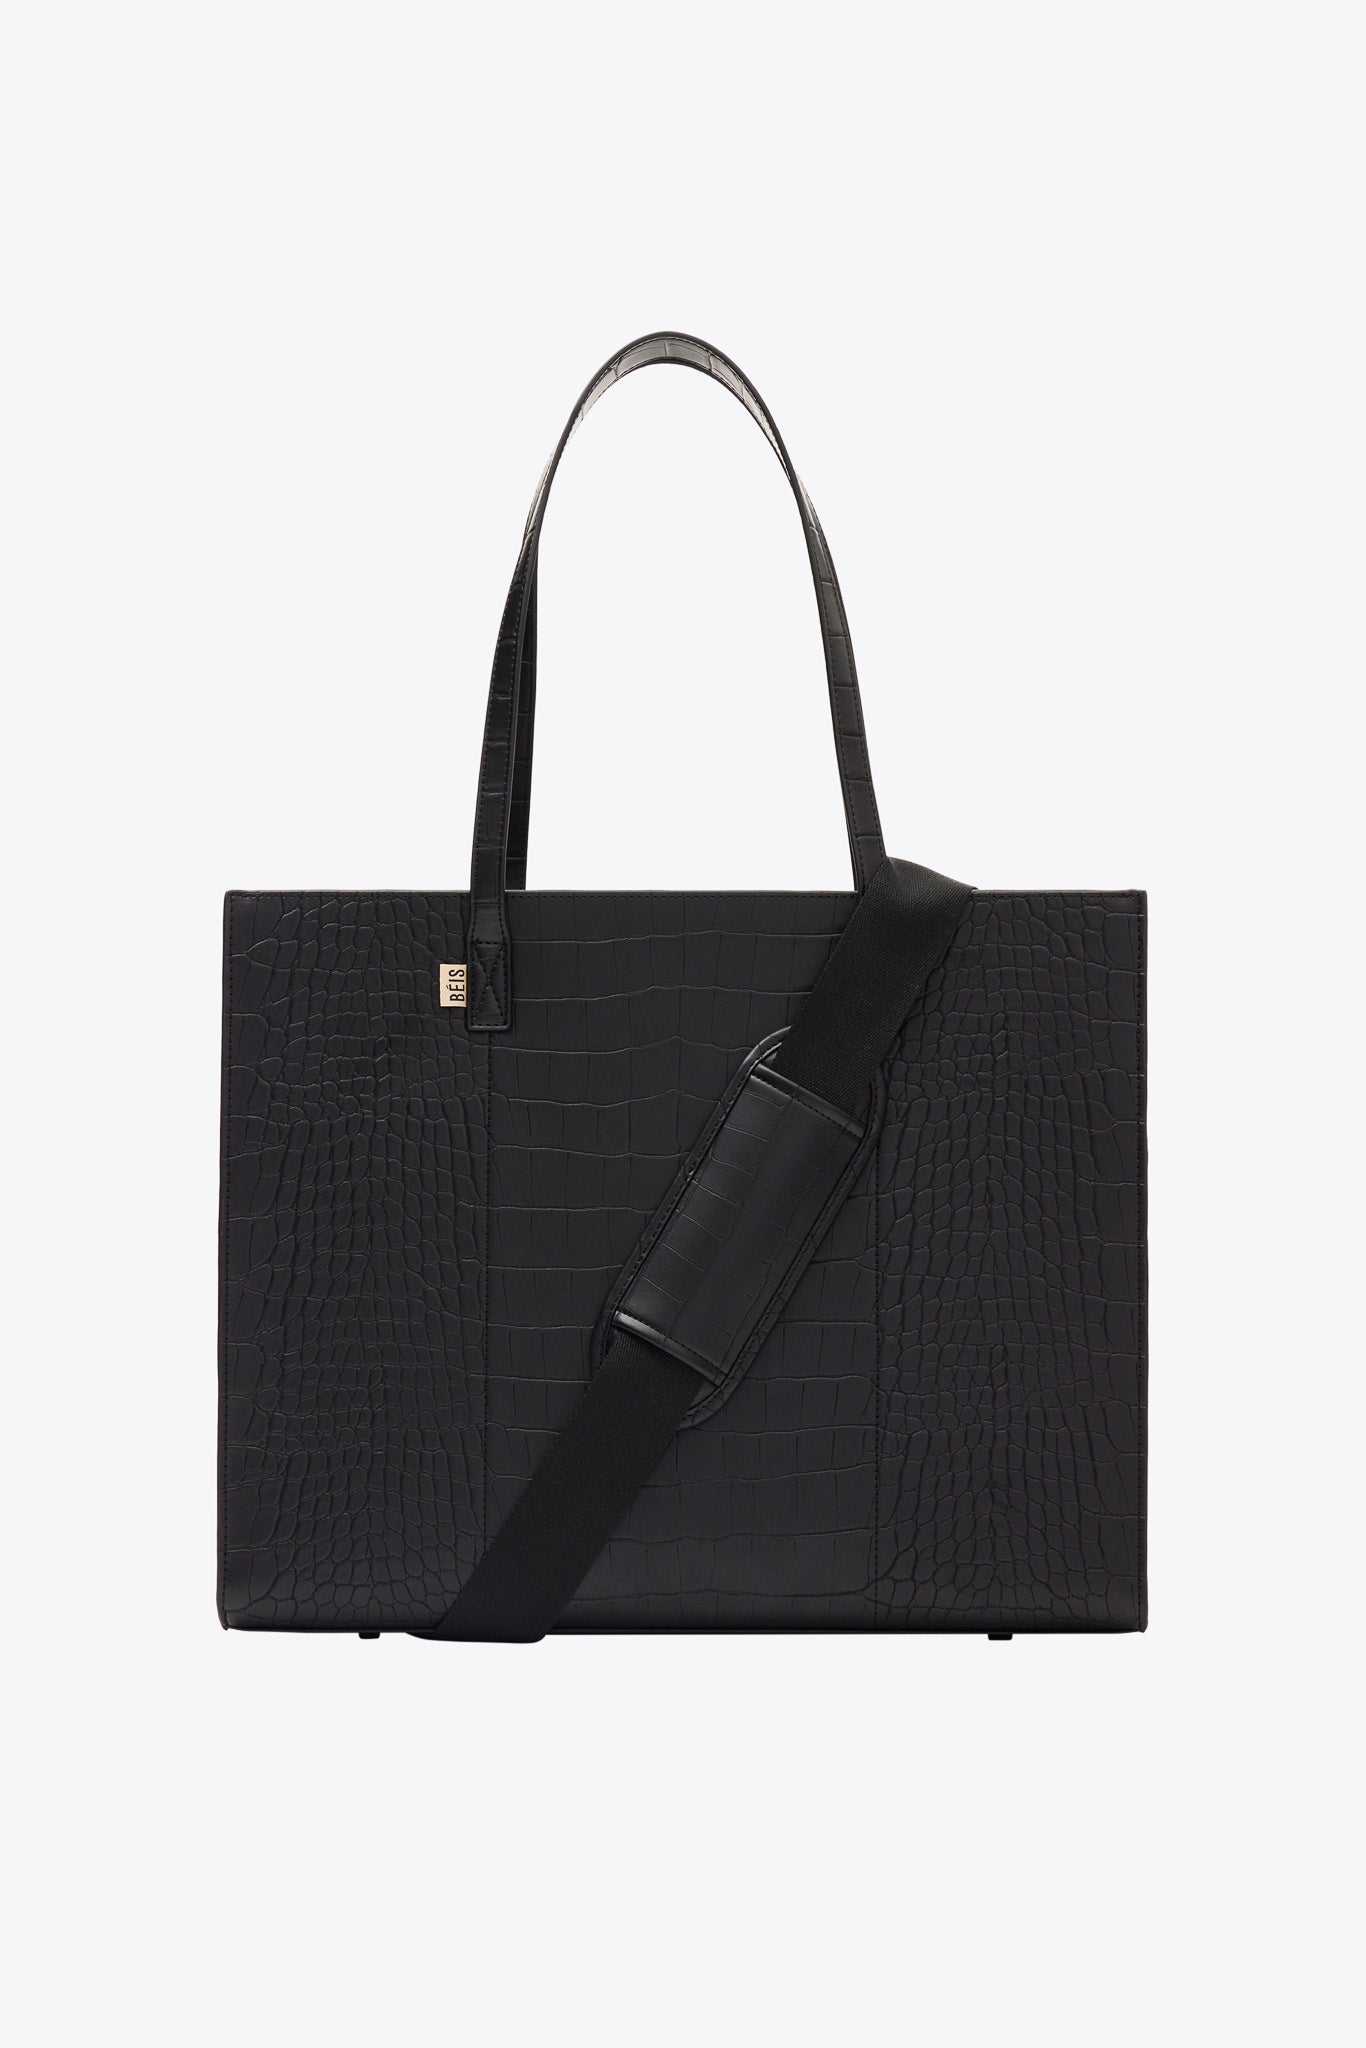 BÉIS 'The Large Work Tote' in Black Croc - Large Laptop Bag & Work Tote In Black Croc